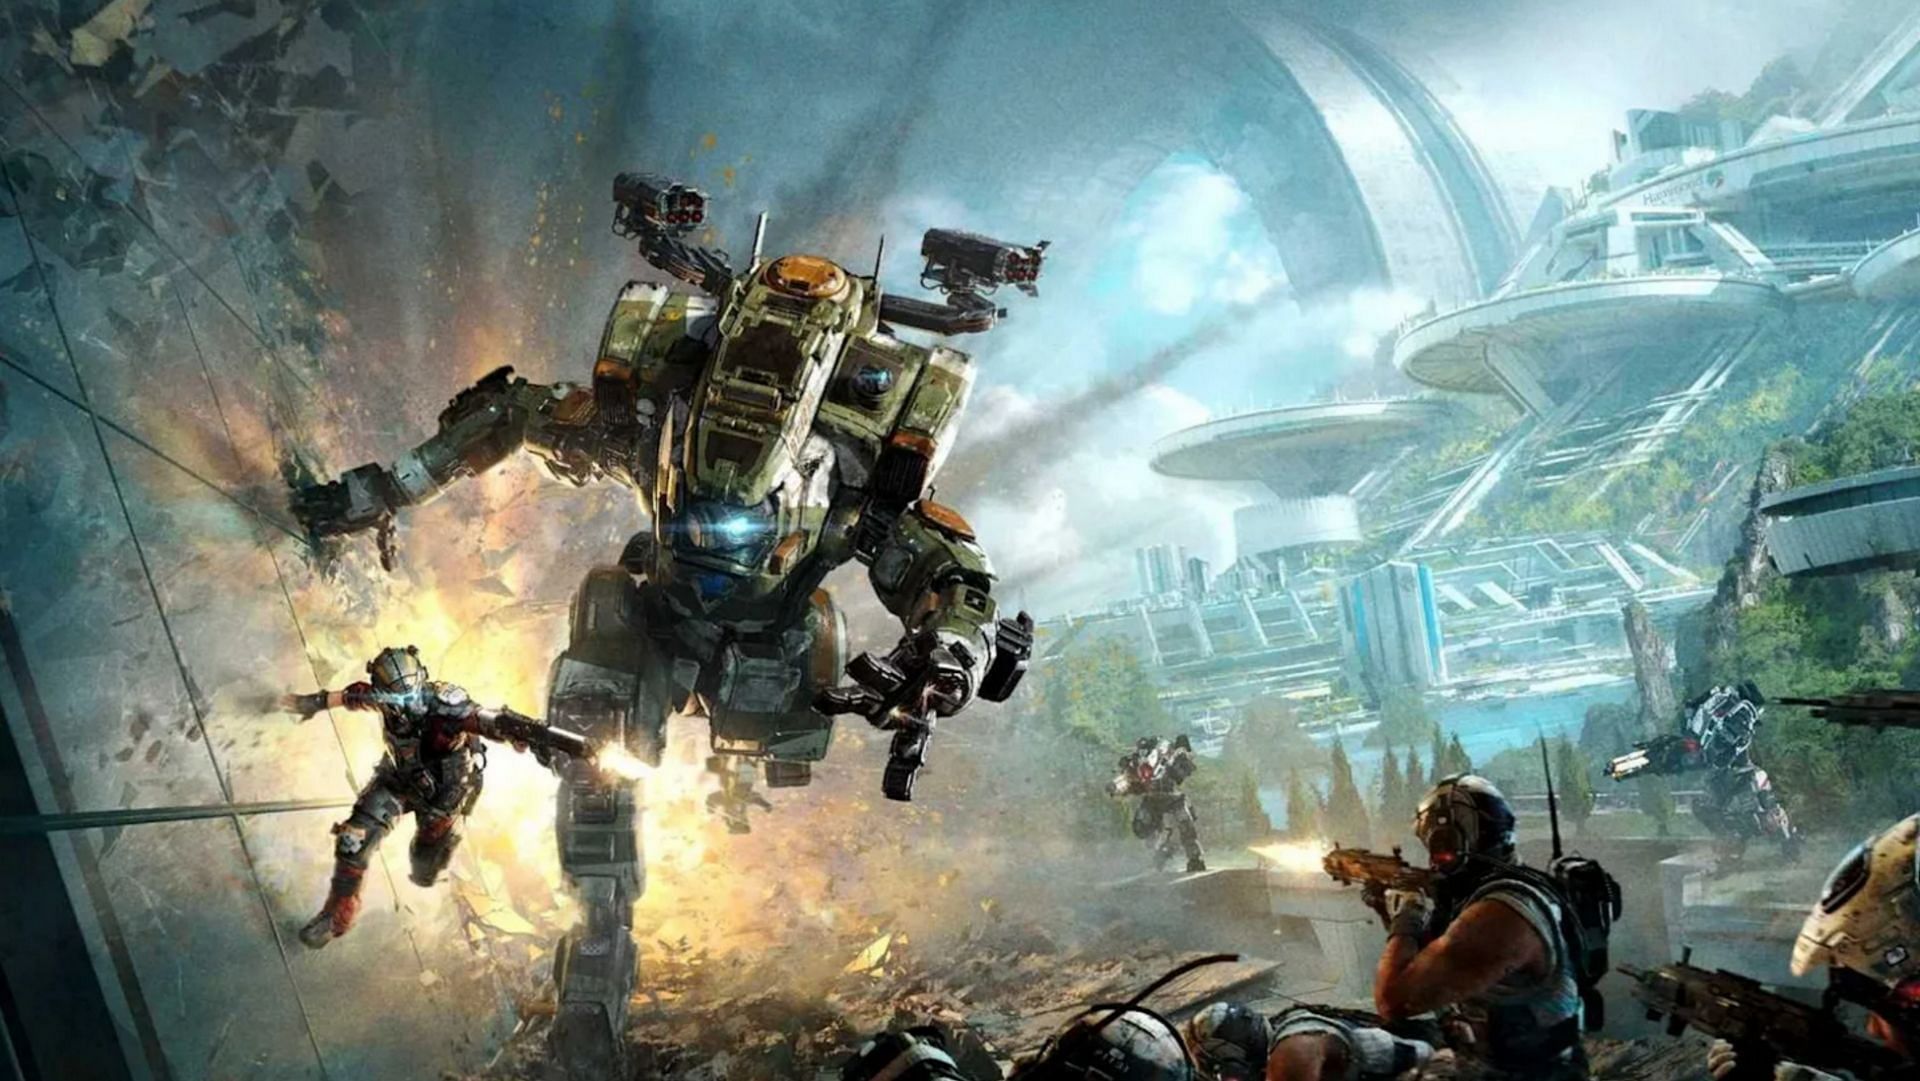 Fans have been speculating about a potential sequel to Titanfall 2 (Image via Respawn)